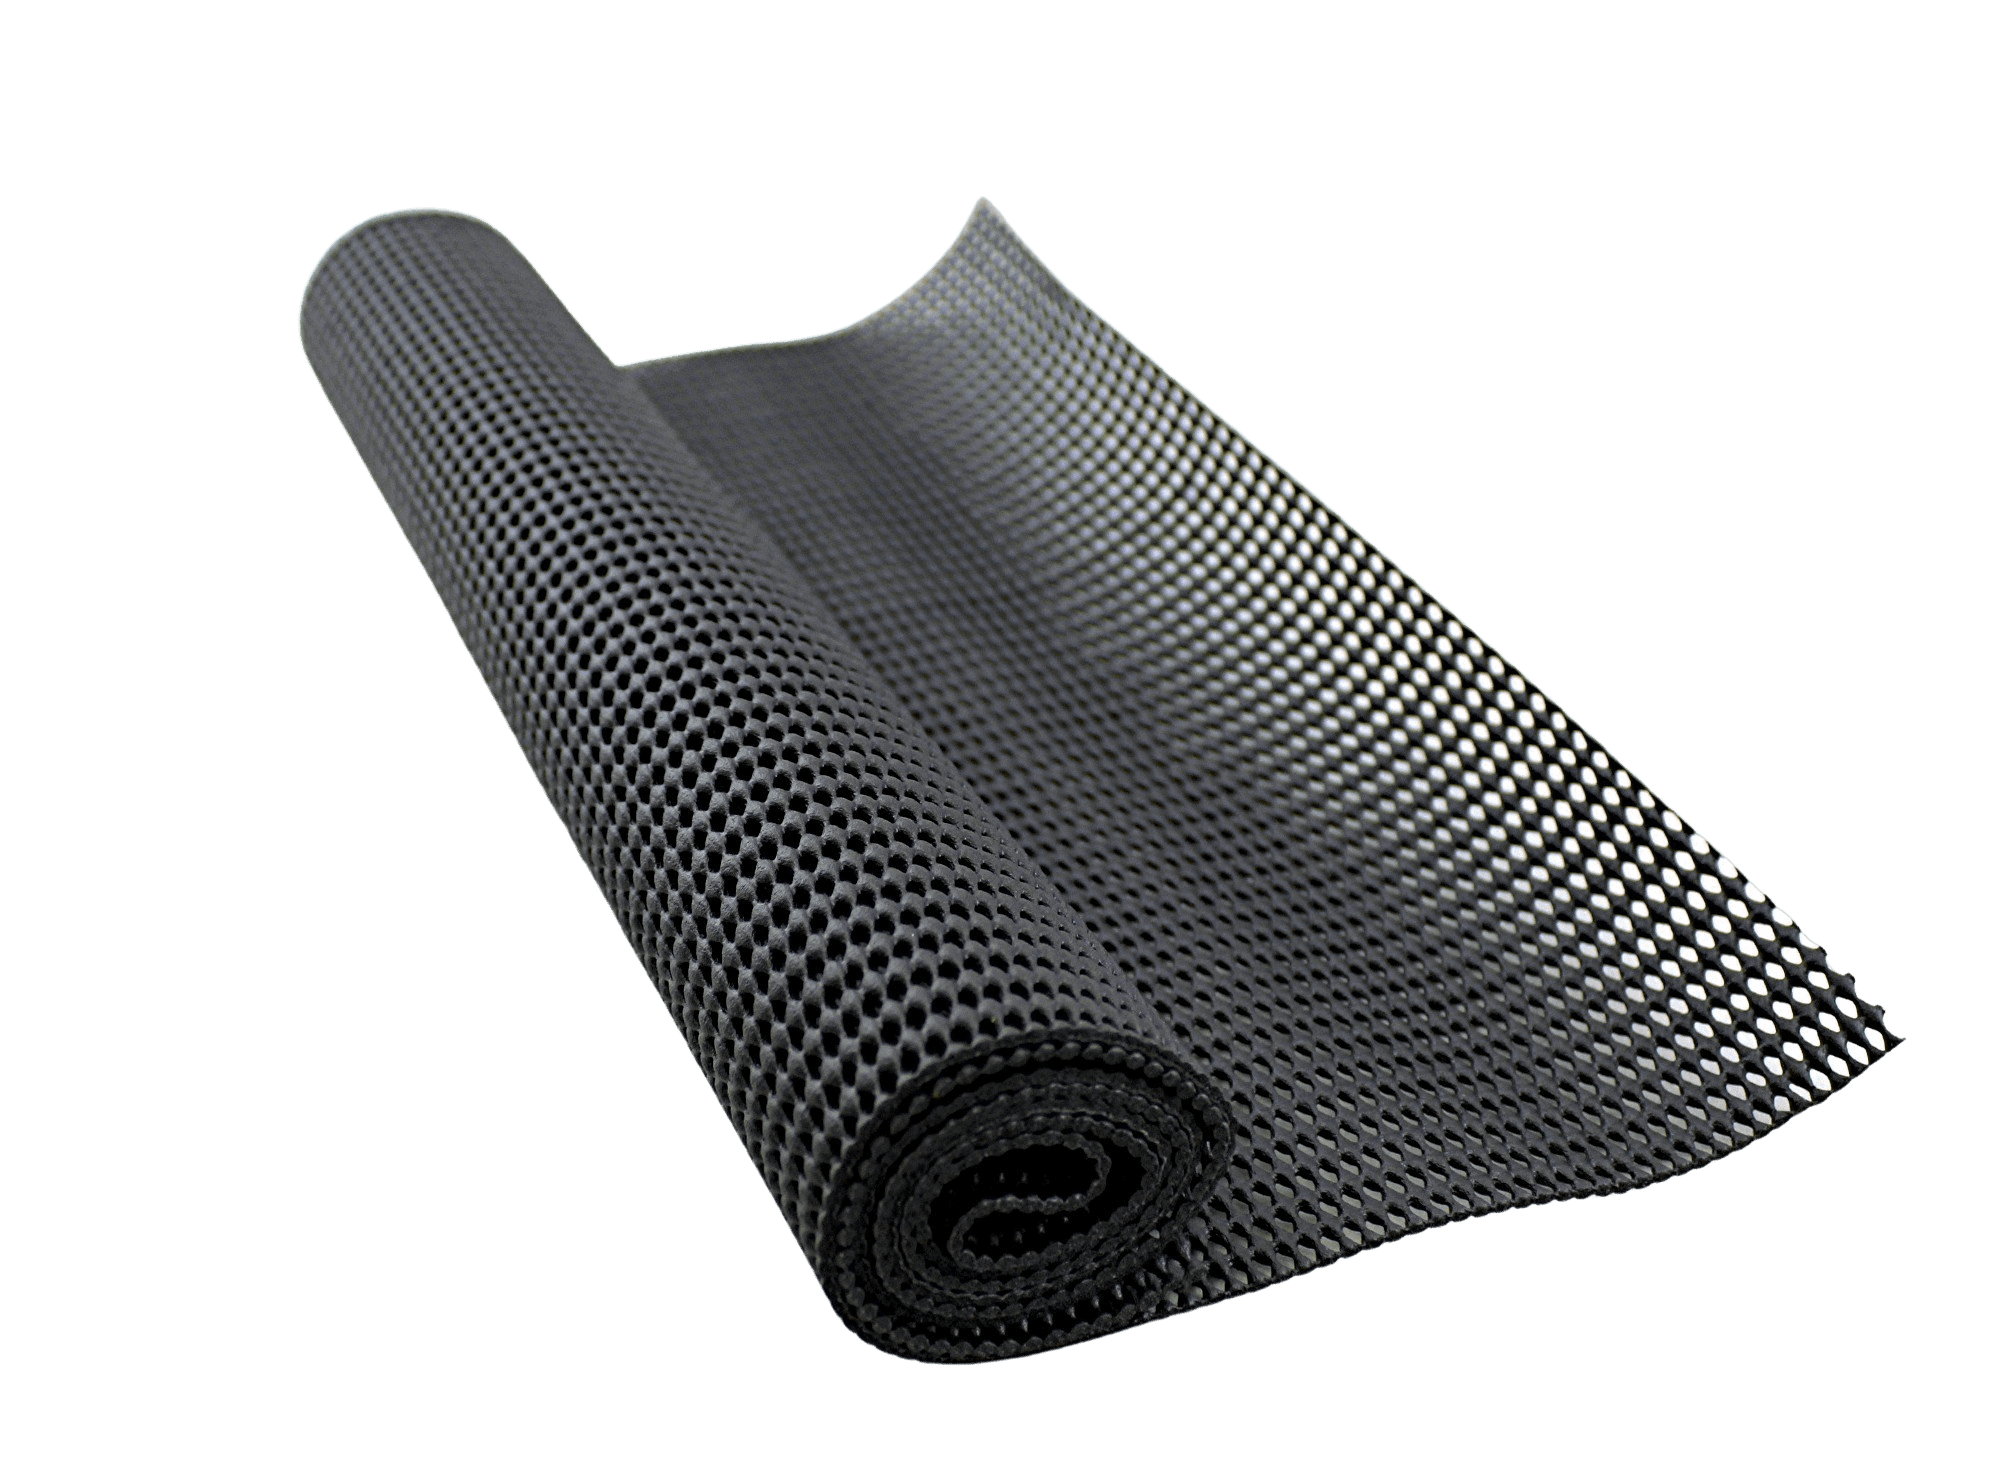 Dependable Industries inc. Essentials Anti-Slip Mat Grip Non Skid - Shelf  and Drawer Liner 12 x 36 - Trim to Fit Black (2 Pack)